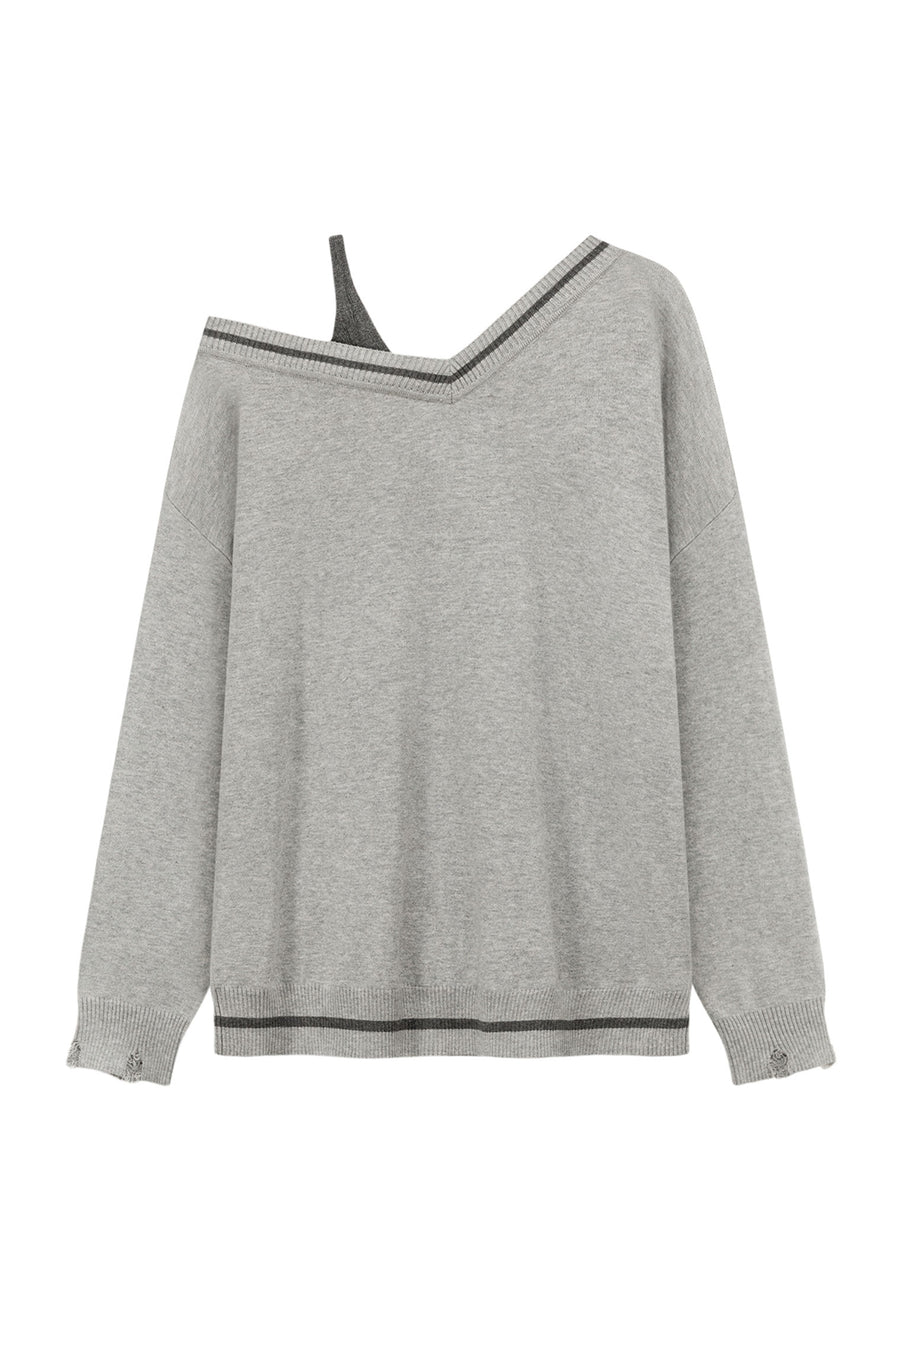 V-Neck Lined Loose Fit Knit Sweater